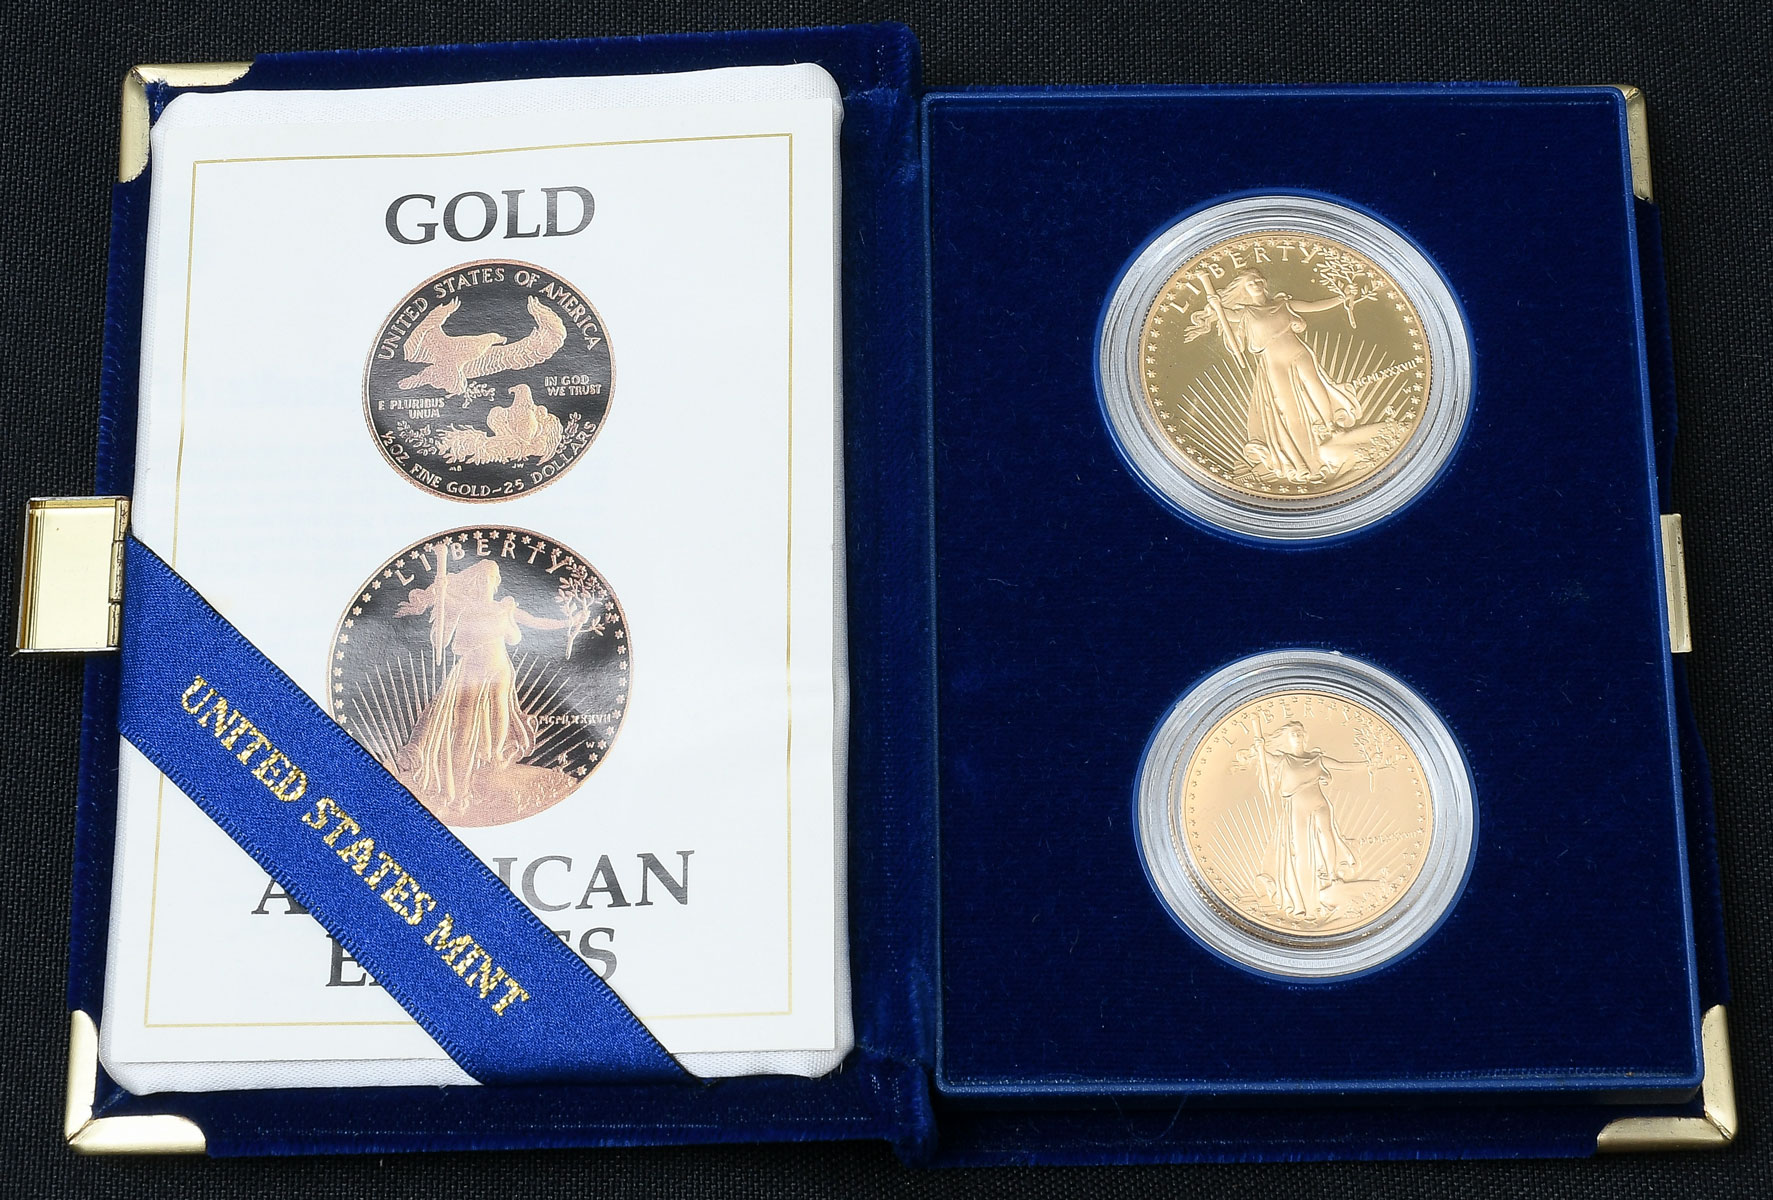 1987 AMERICAN EAGLE PROOF GOLD 275699